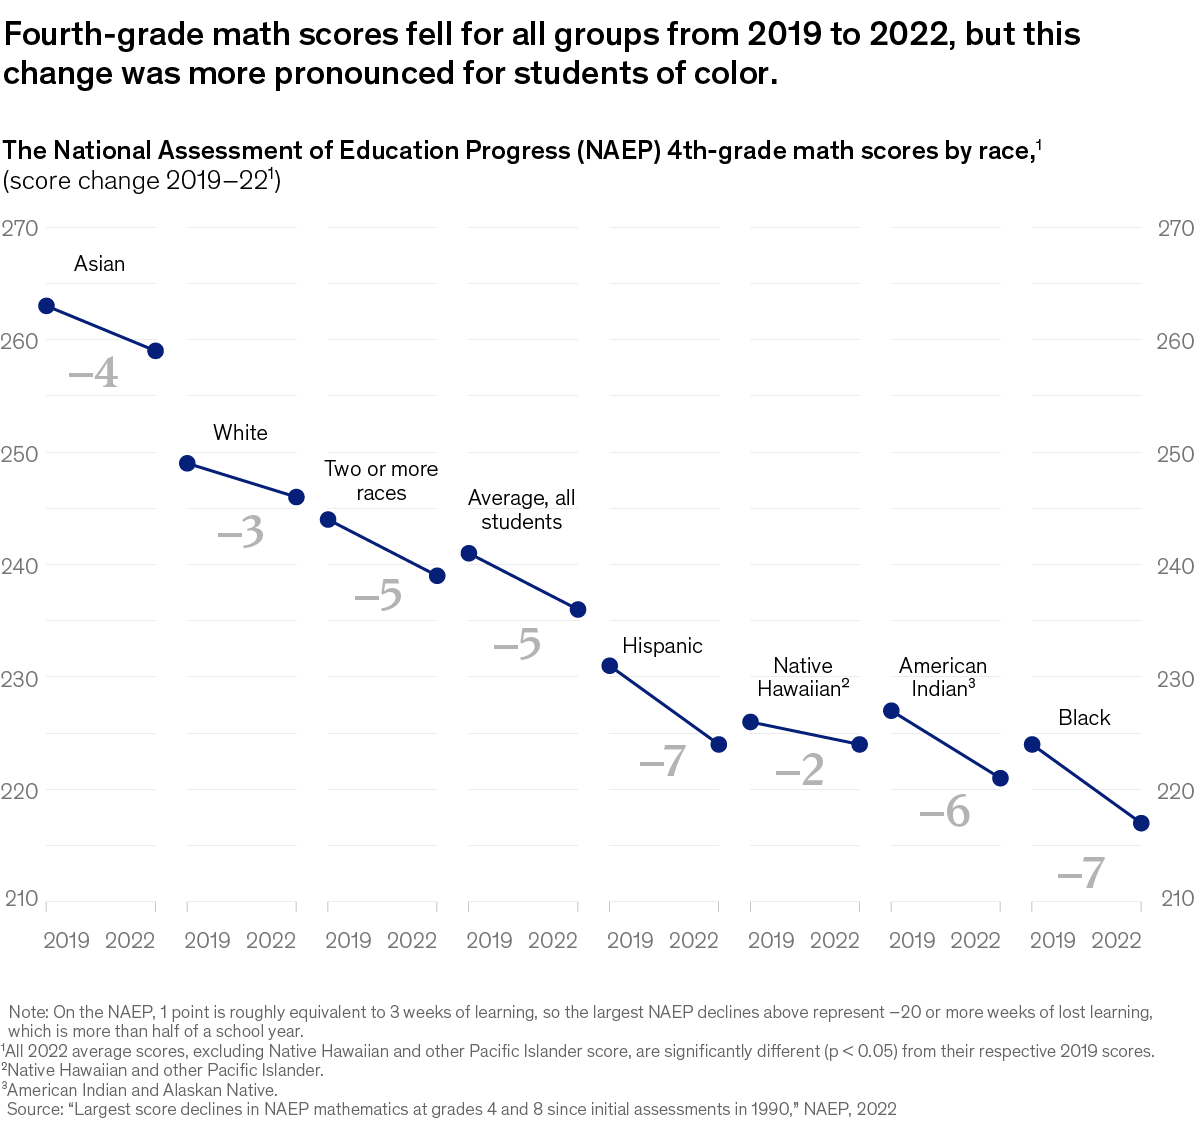 A chart titled “Fourth-grade math scores fell for all groups from 2019 to 2022, but this change was more pronounced for students of color.” Click to open the full article on McKinsey.com.